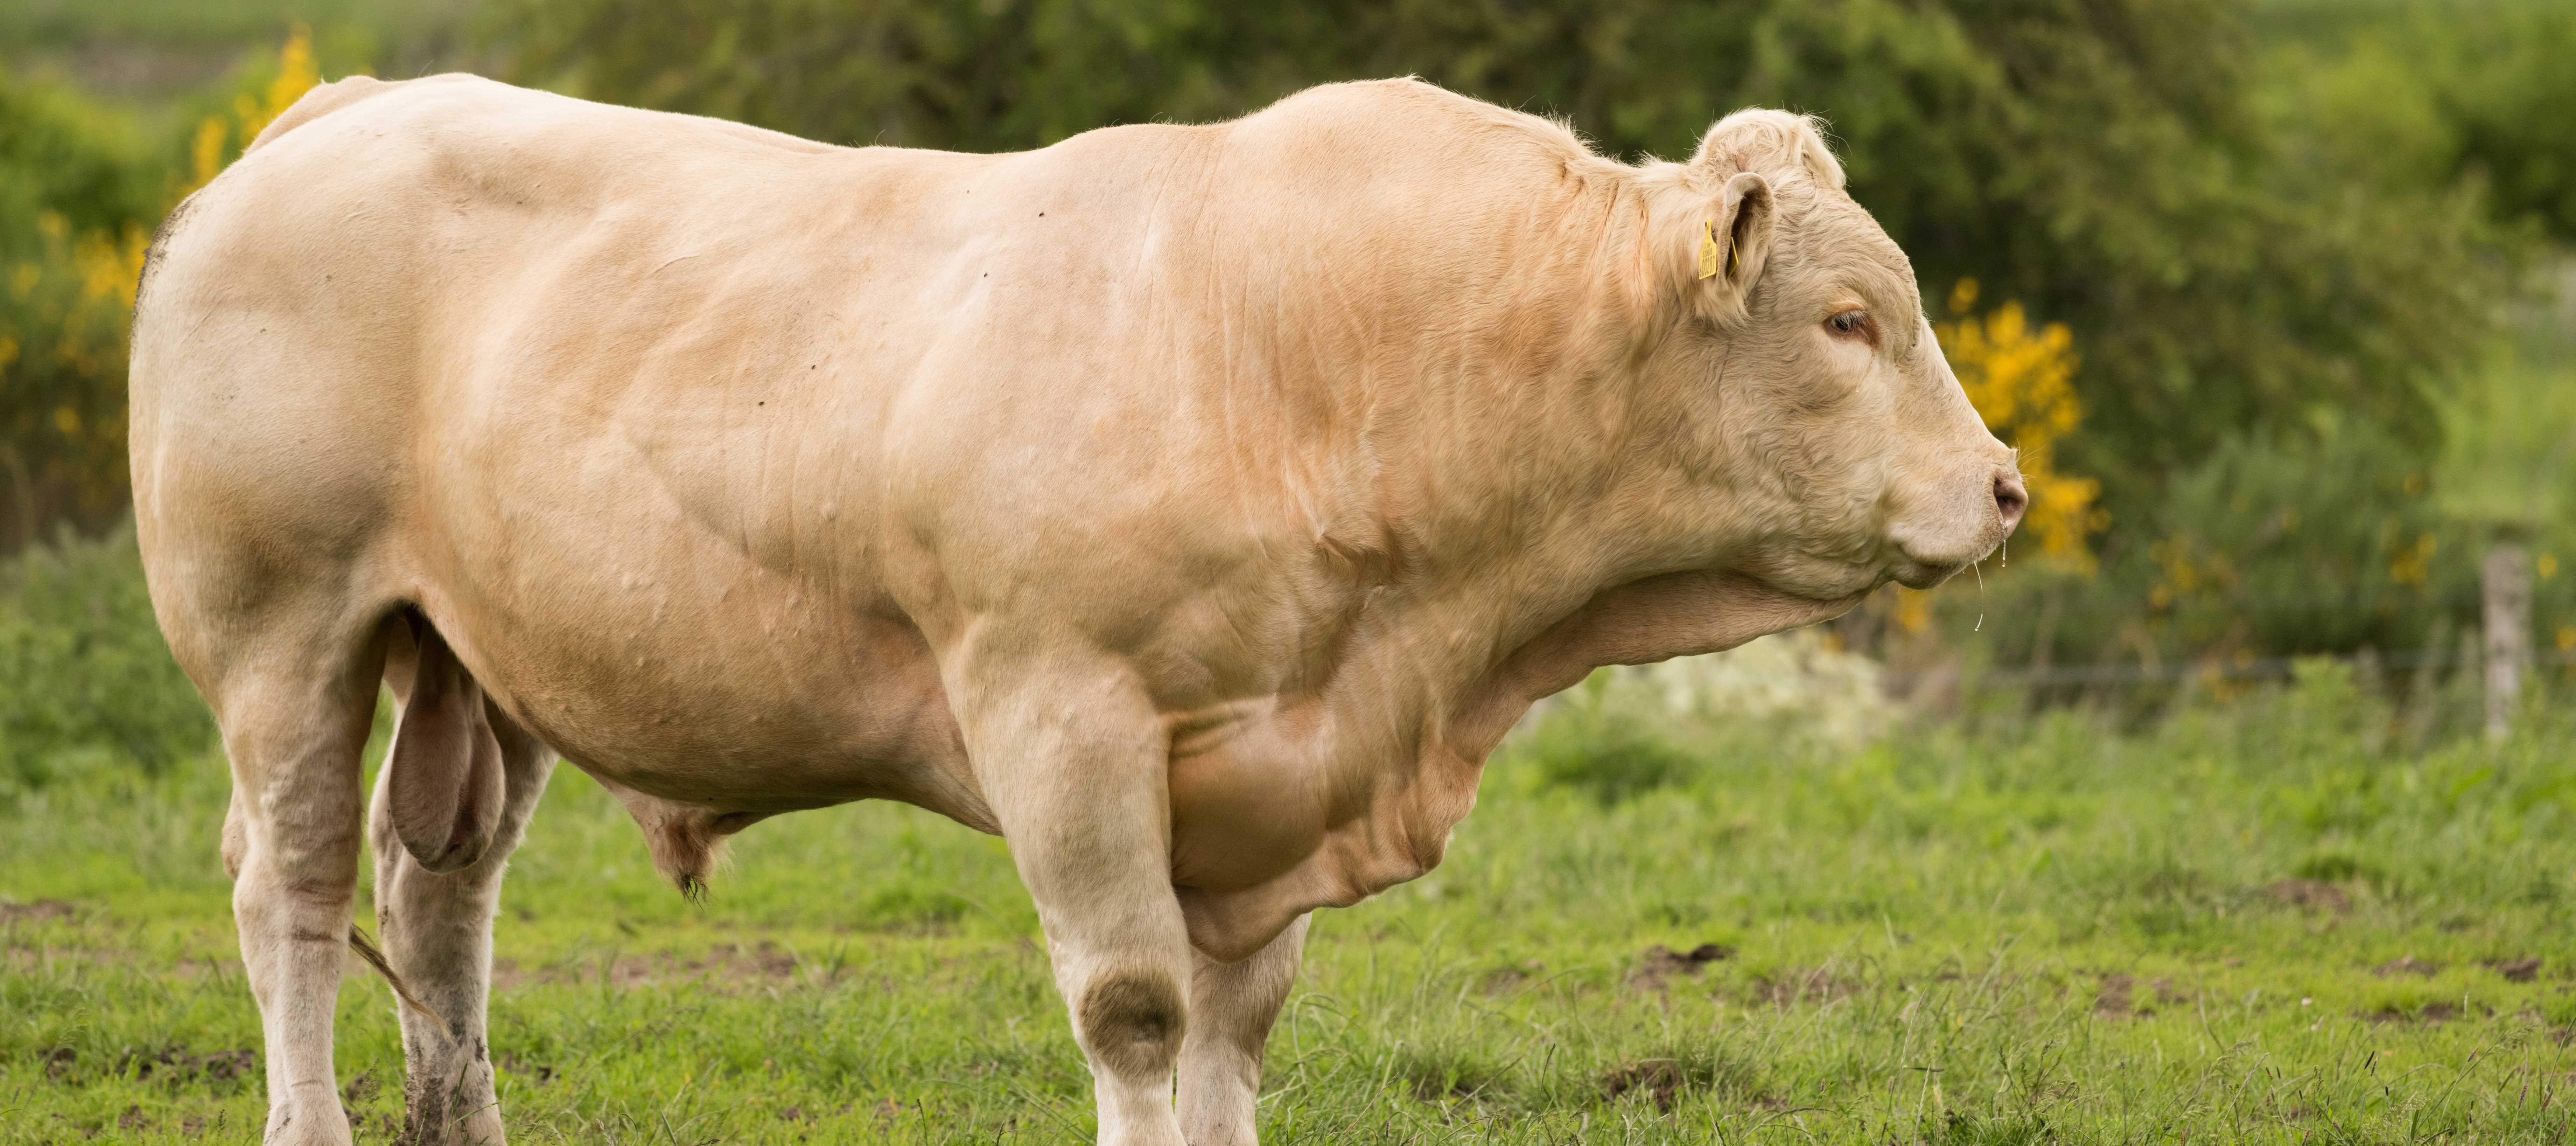 Protect Your Cattle from Trichomoniasis When Looking at Bulls for Sale